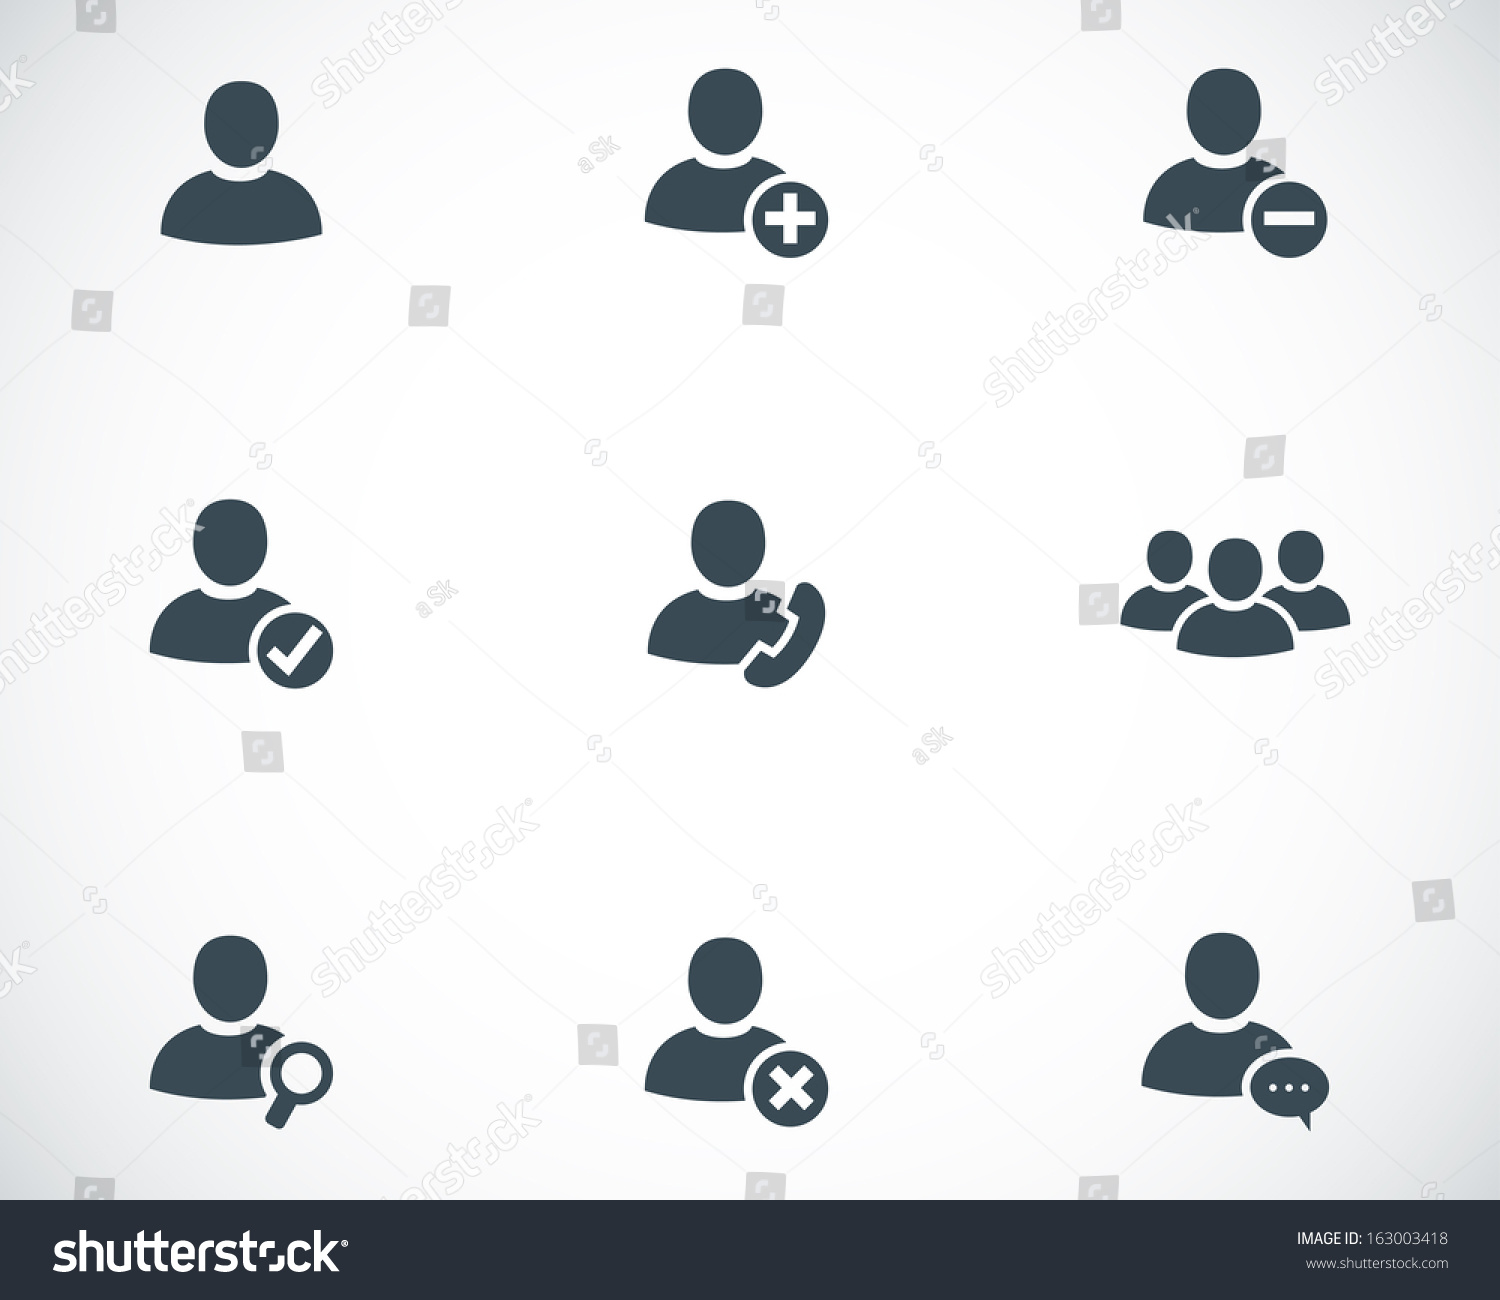 Vector Black People Icons Set Stock Vector (Royalty Free) 163003418